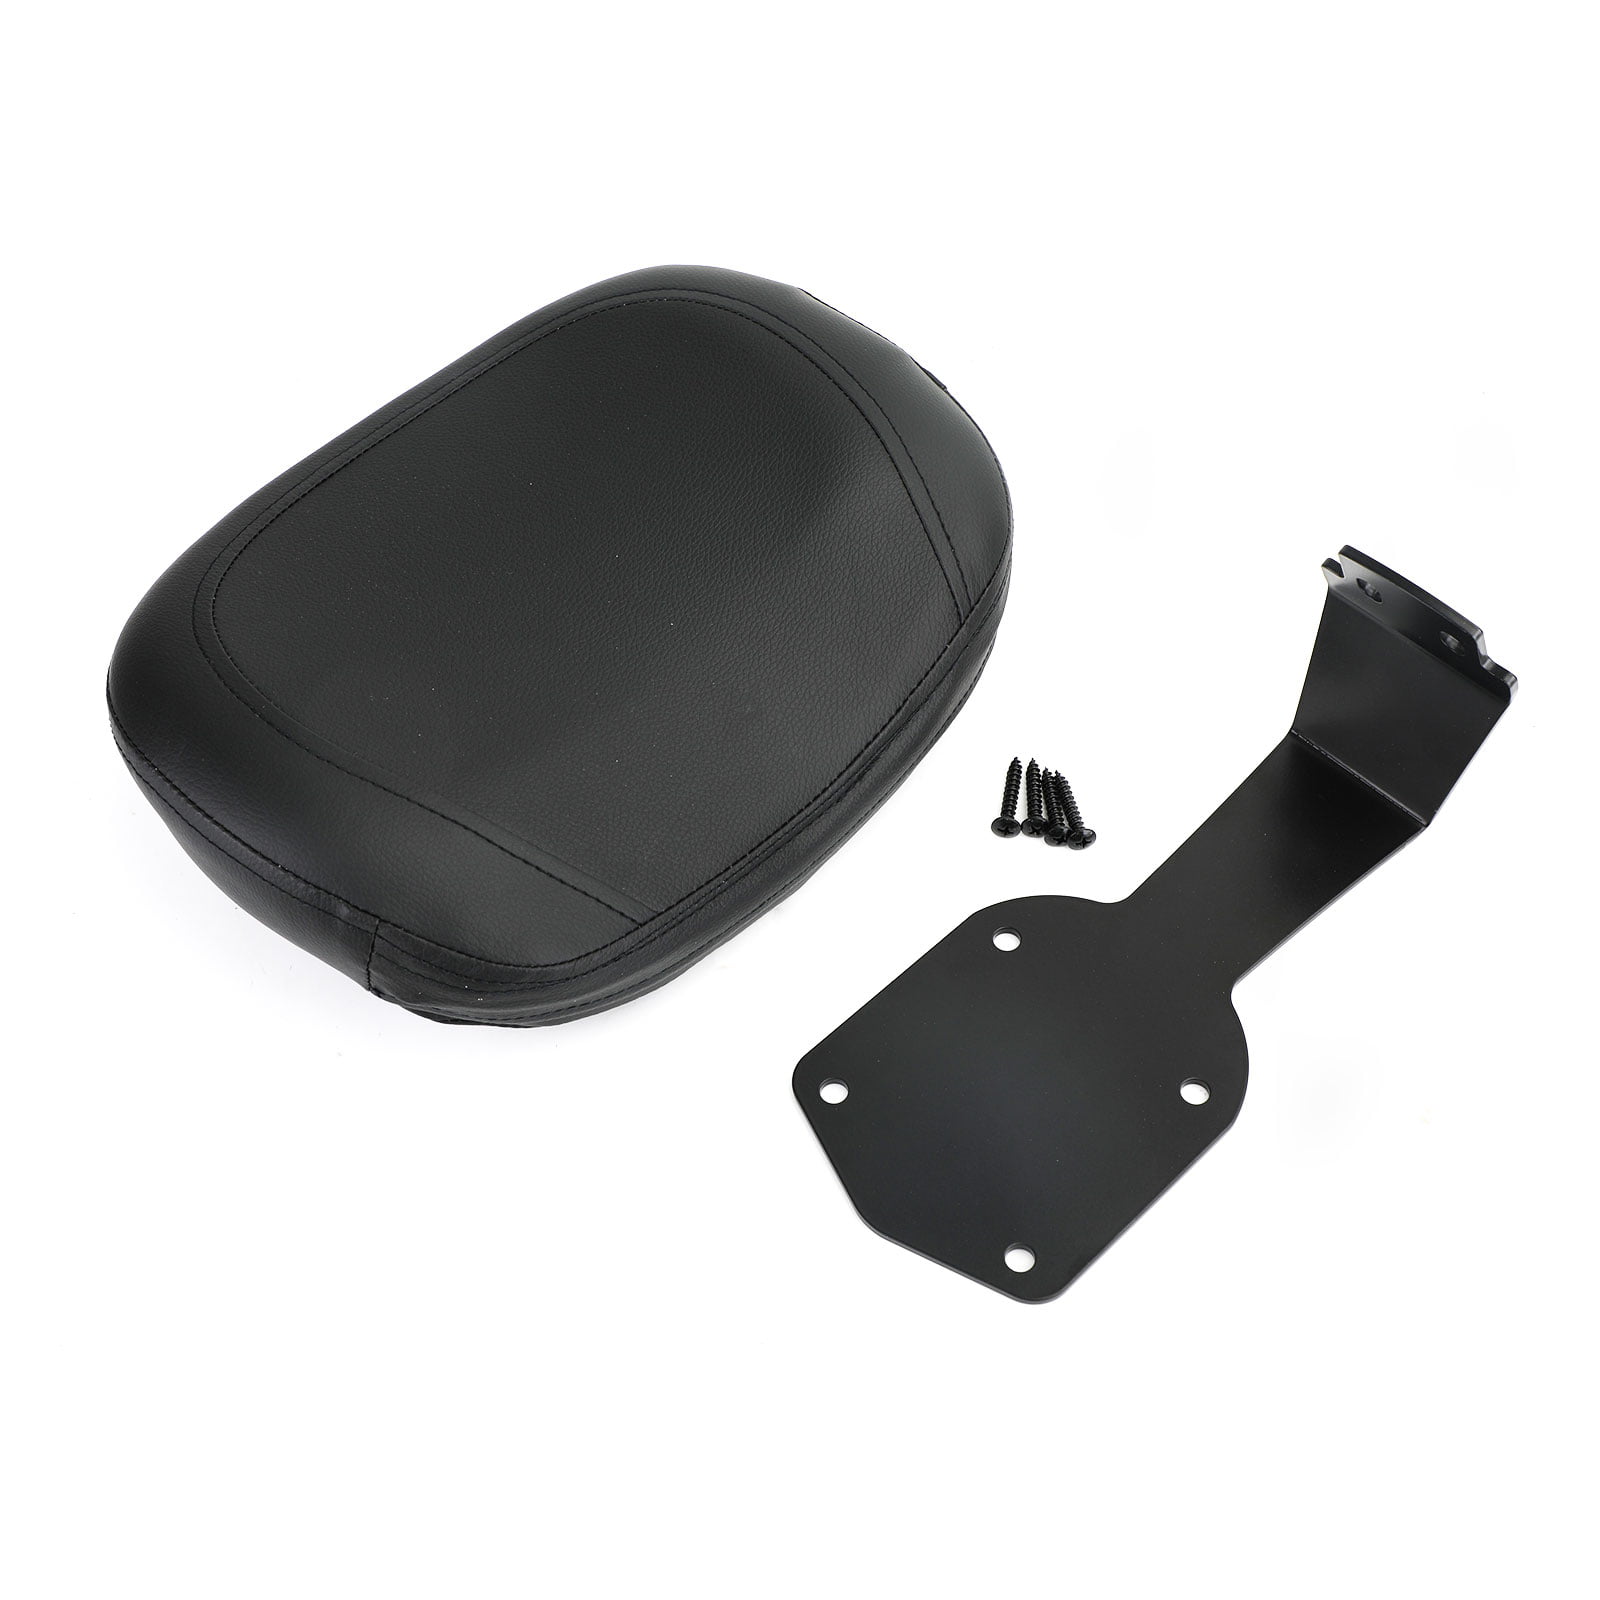 Lifan Motorcycle Front Driver Backrest fit for Lifan V16 LF250-D LF250 A 